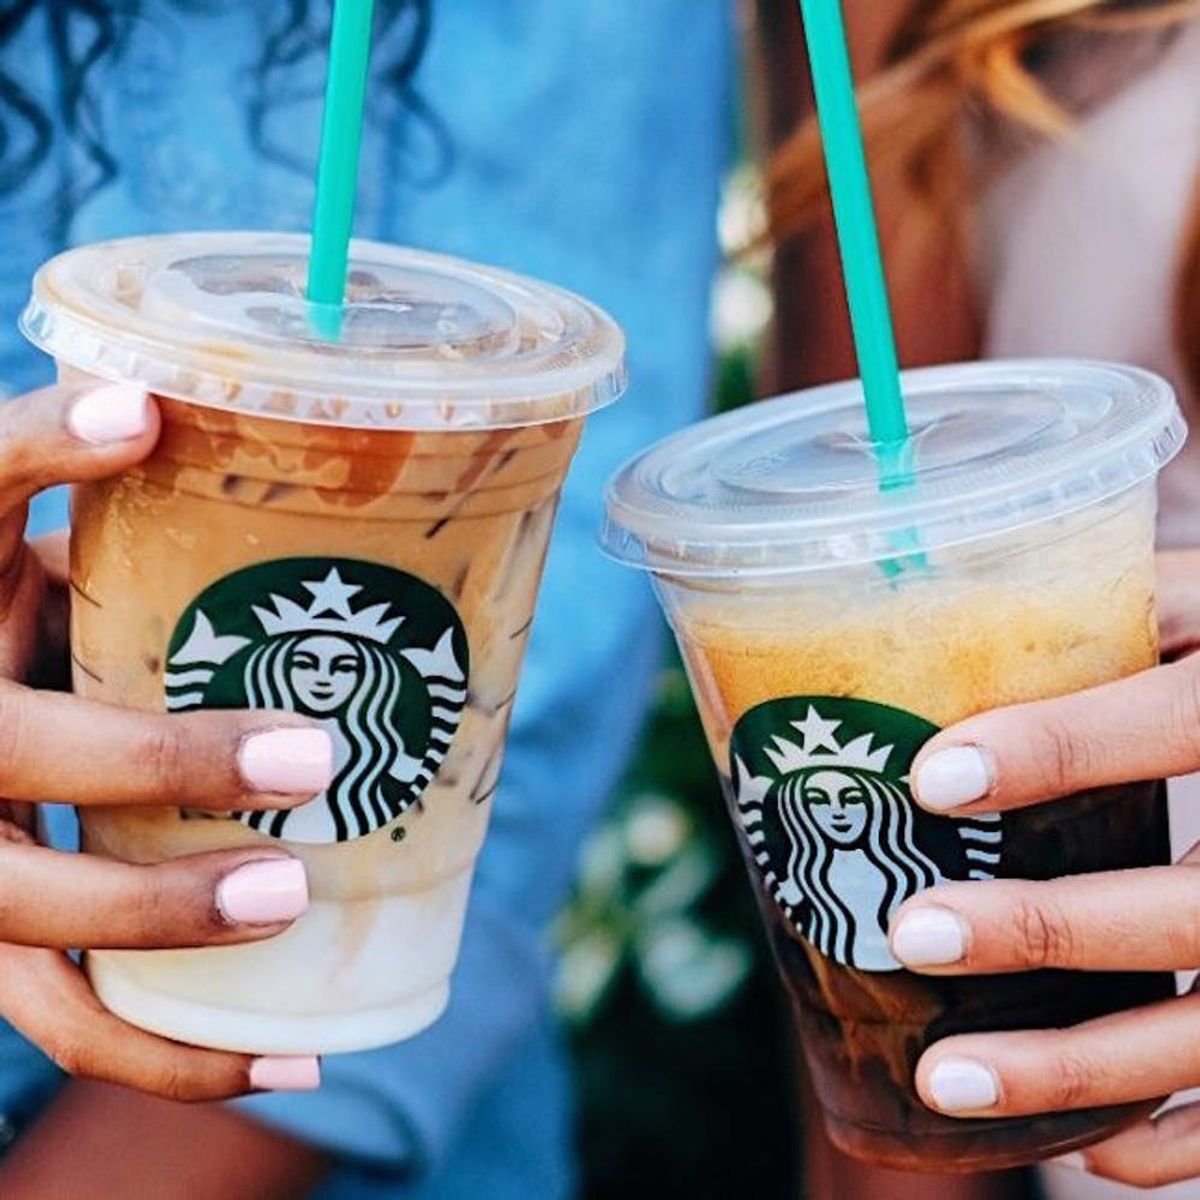 PSA: Here’s How You Can Get Your Hands on Free Starbucks RIGHT NOW